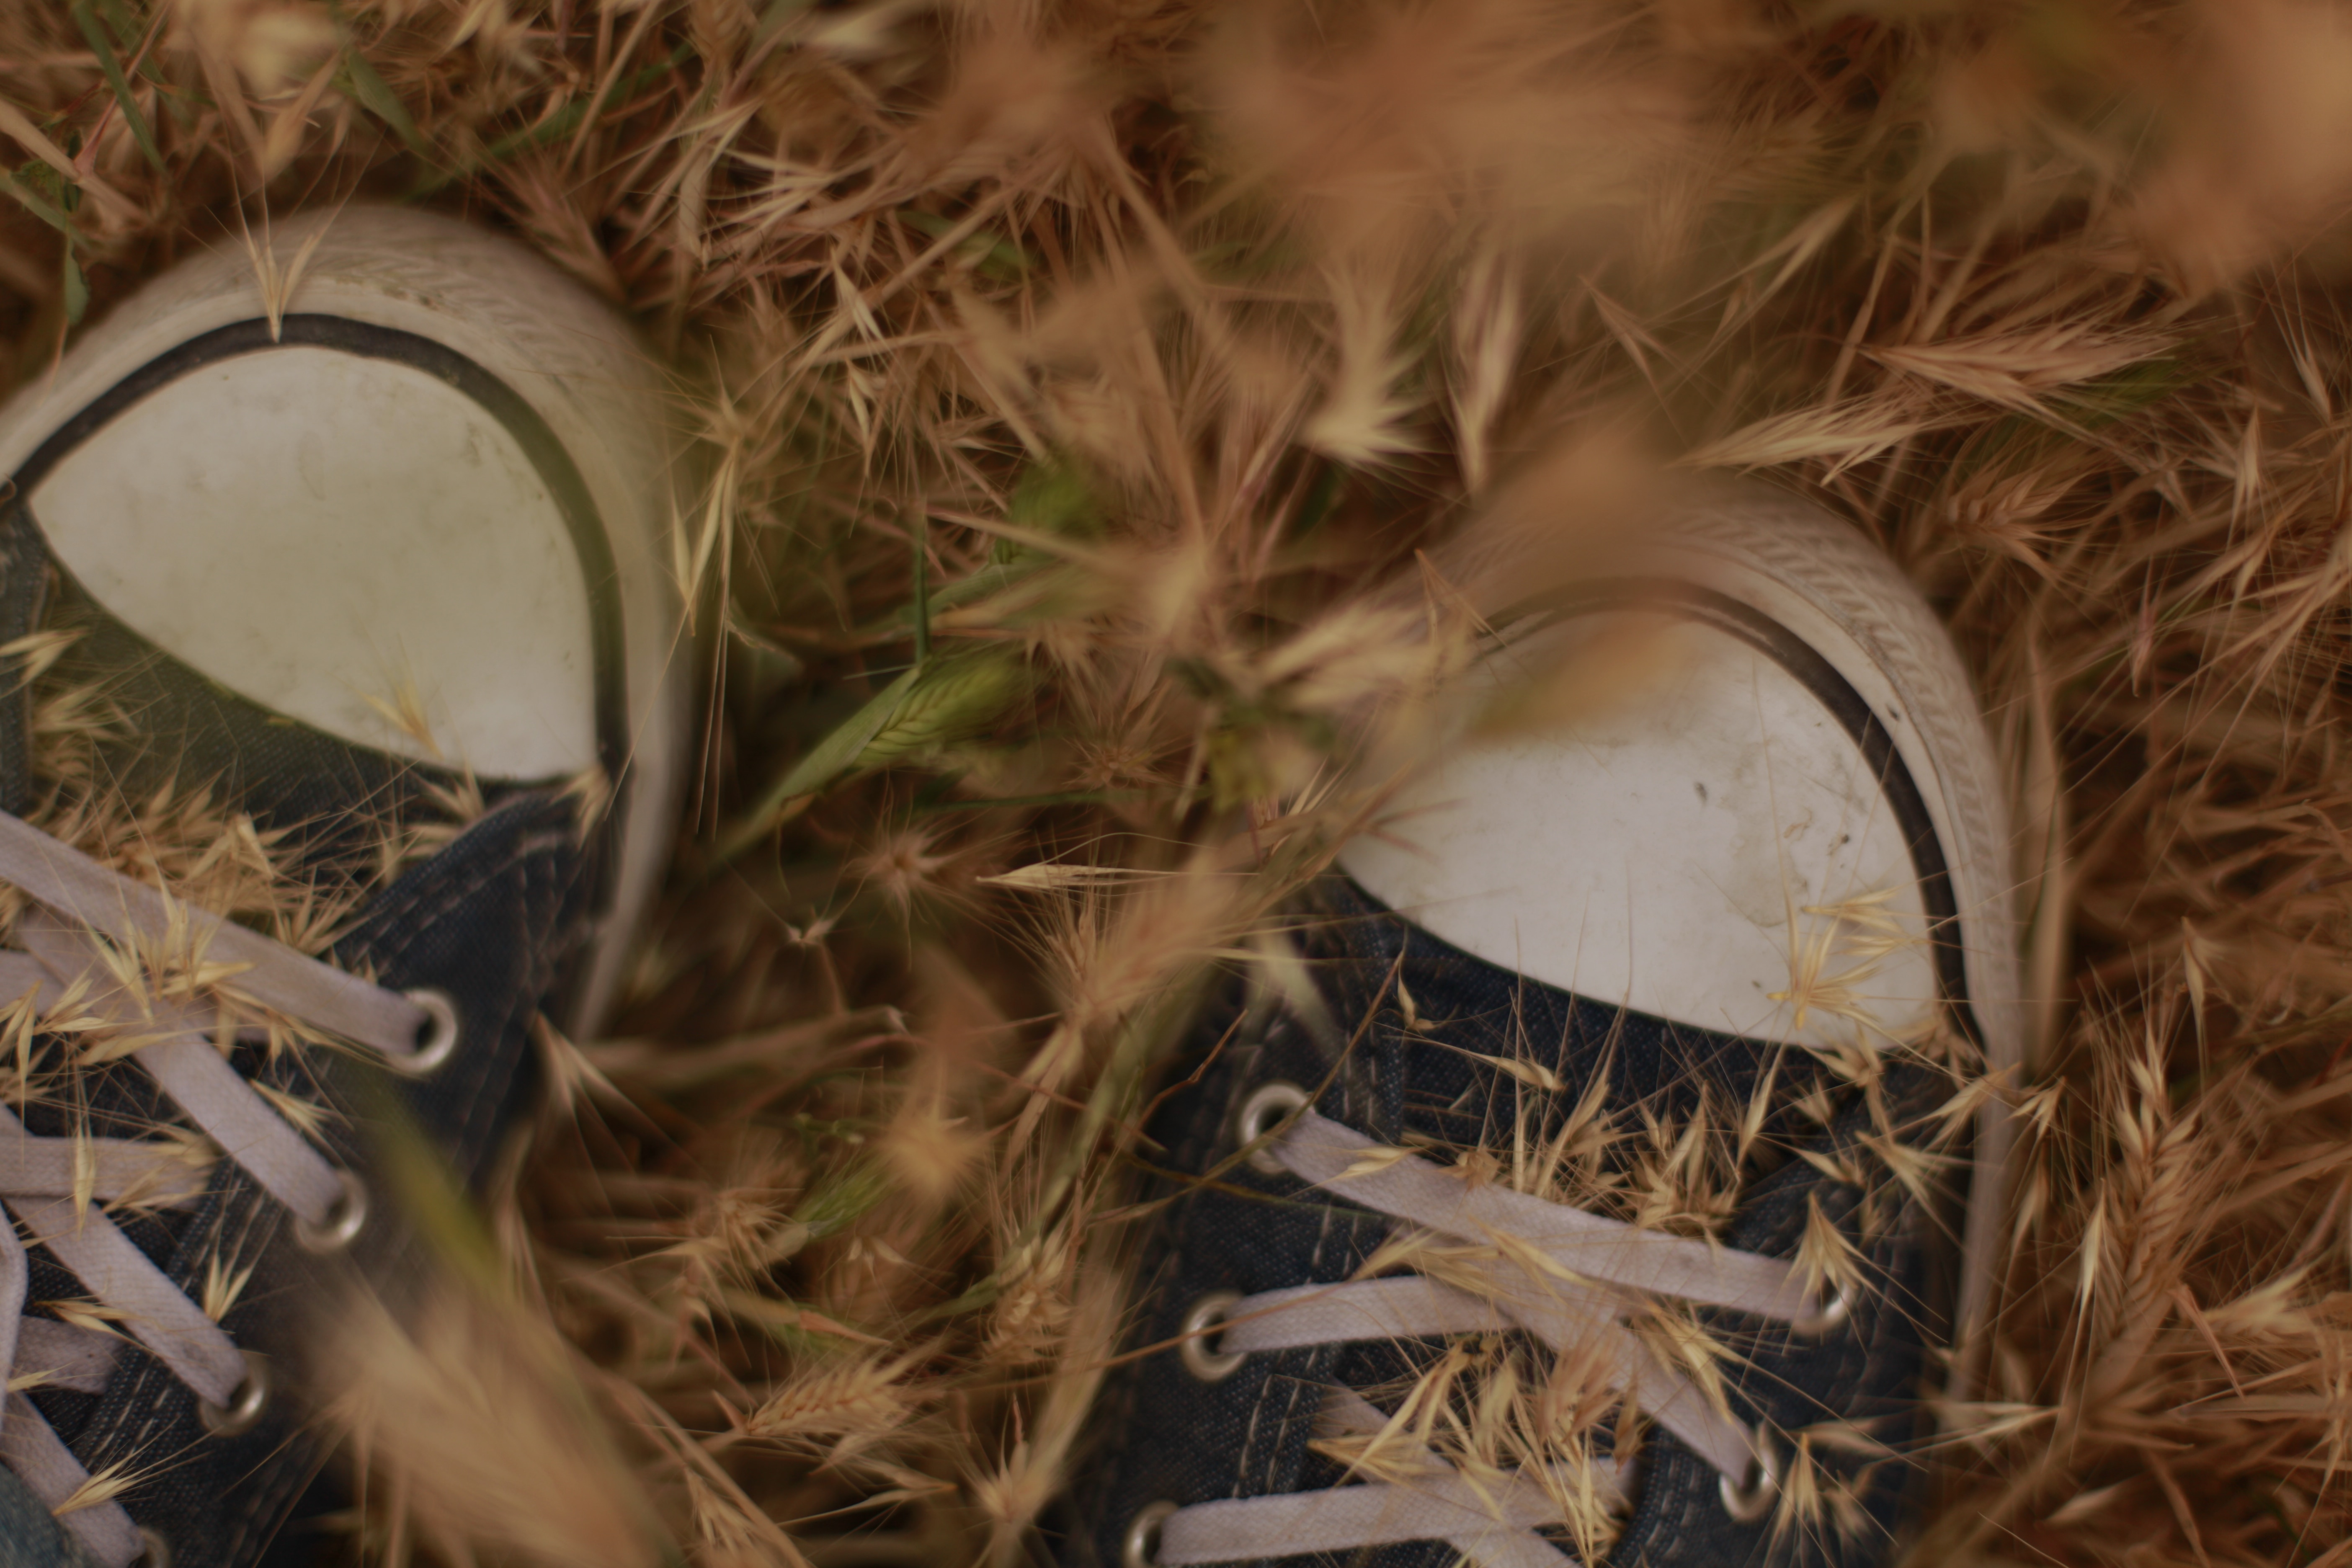 pair of black-and-white low top sneakers in brown grass